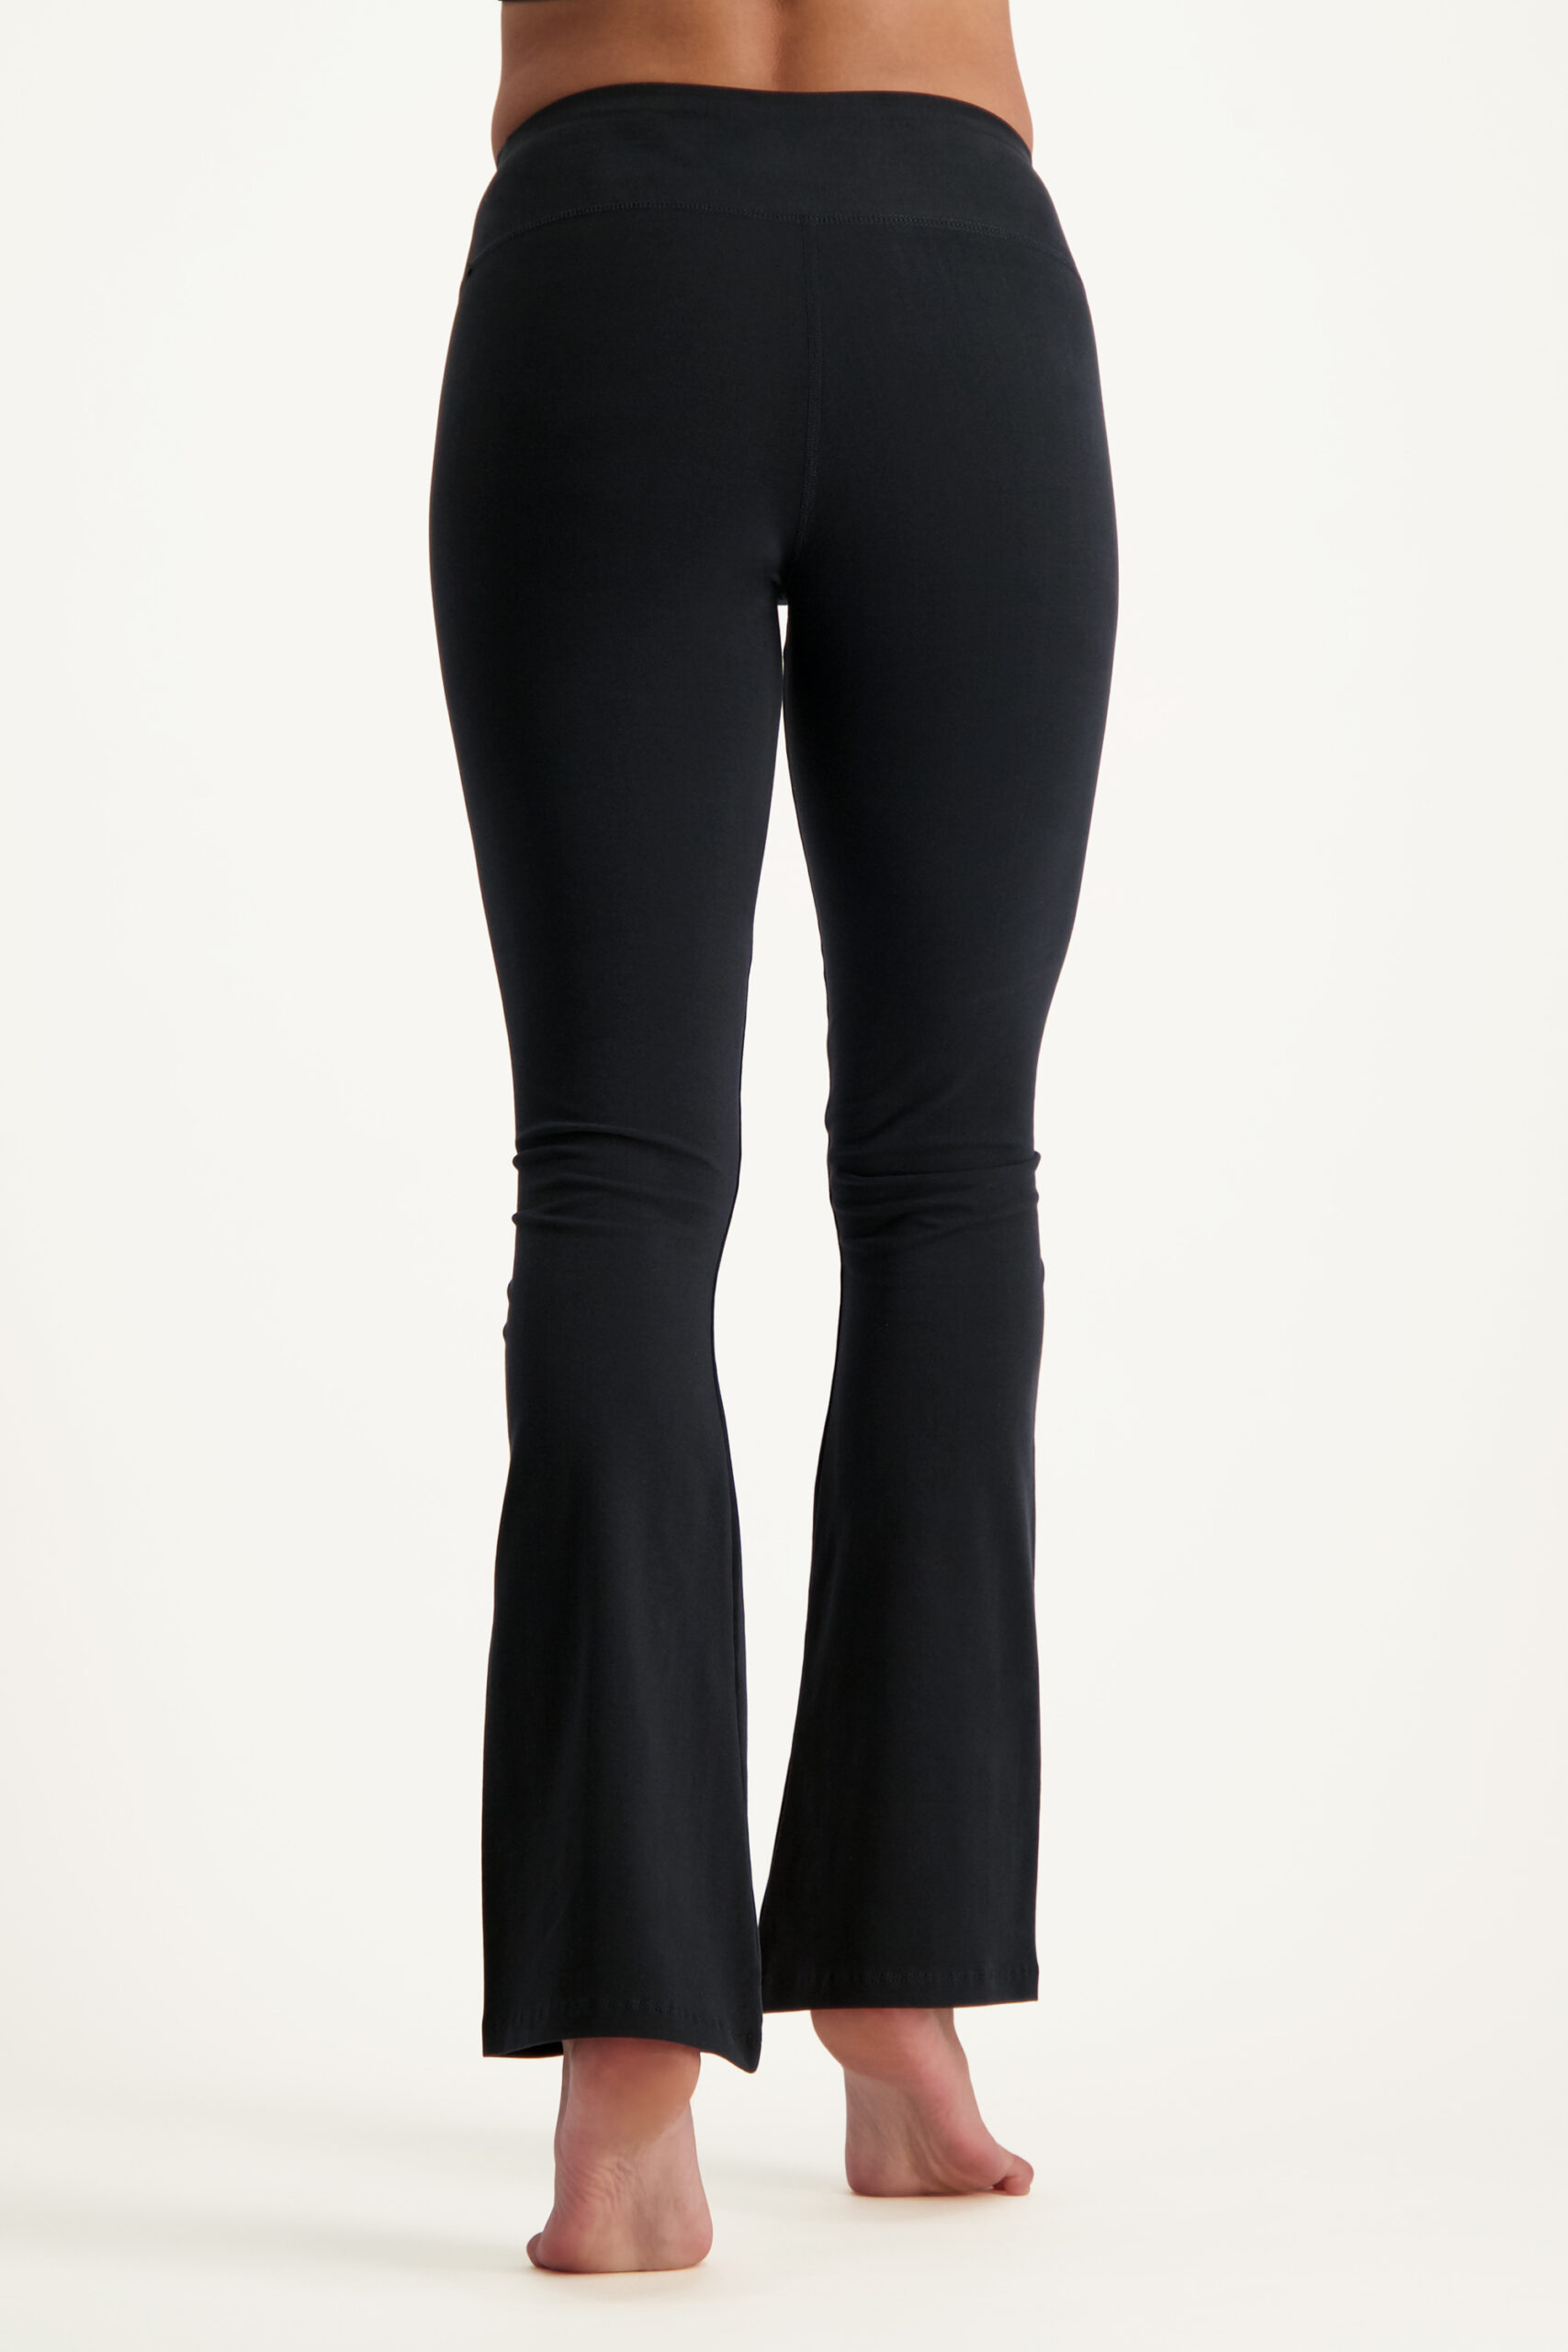 Sustainable Flare Yoga Pants And Yoga Top